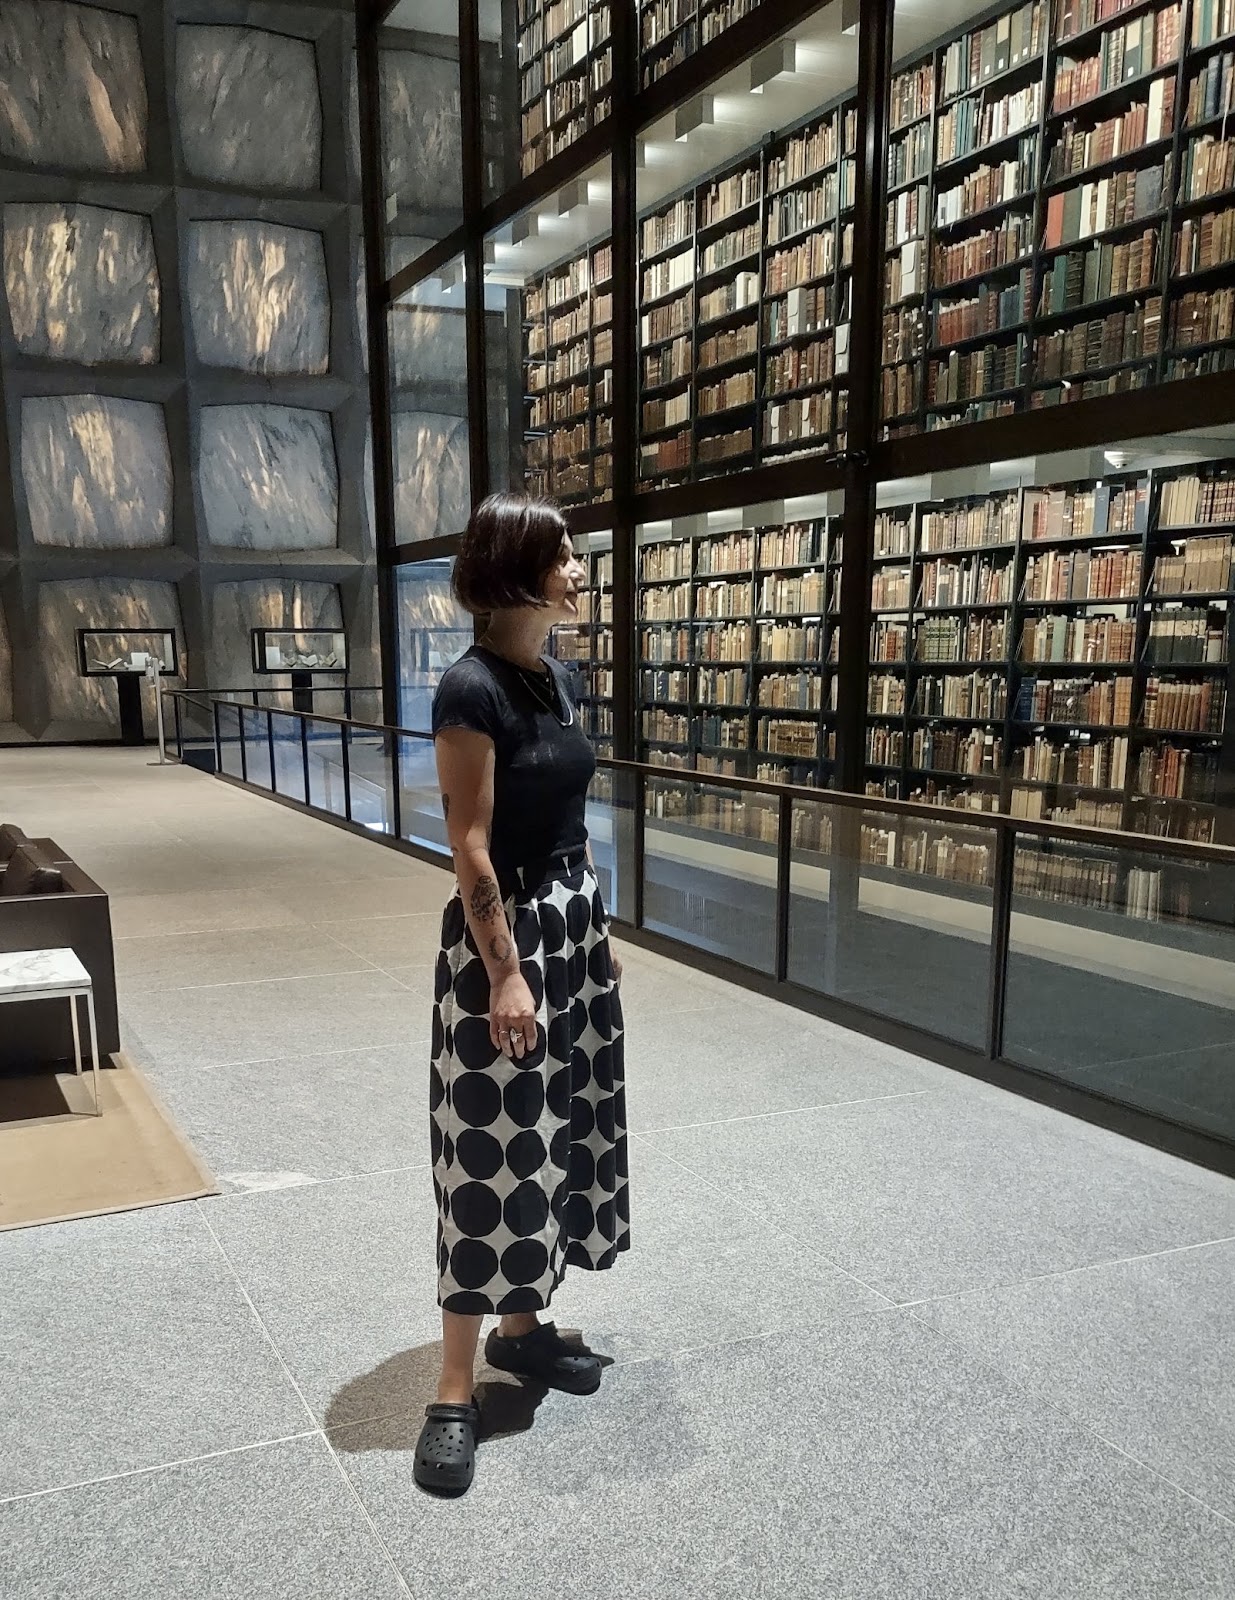 Dr. Victoria Papa at the Beinecke Rare Book and Manuscript Library